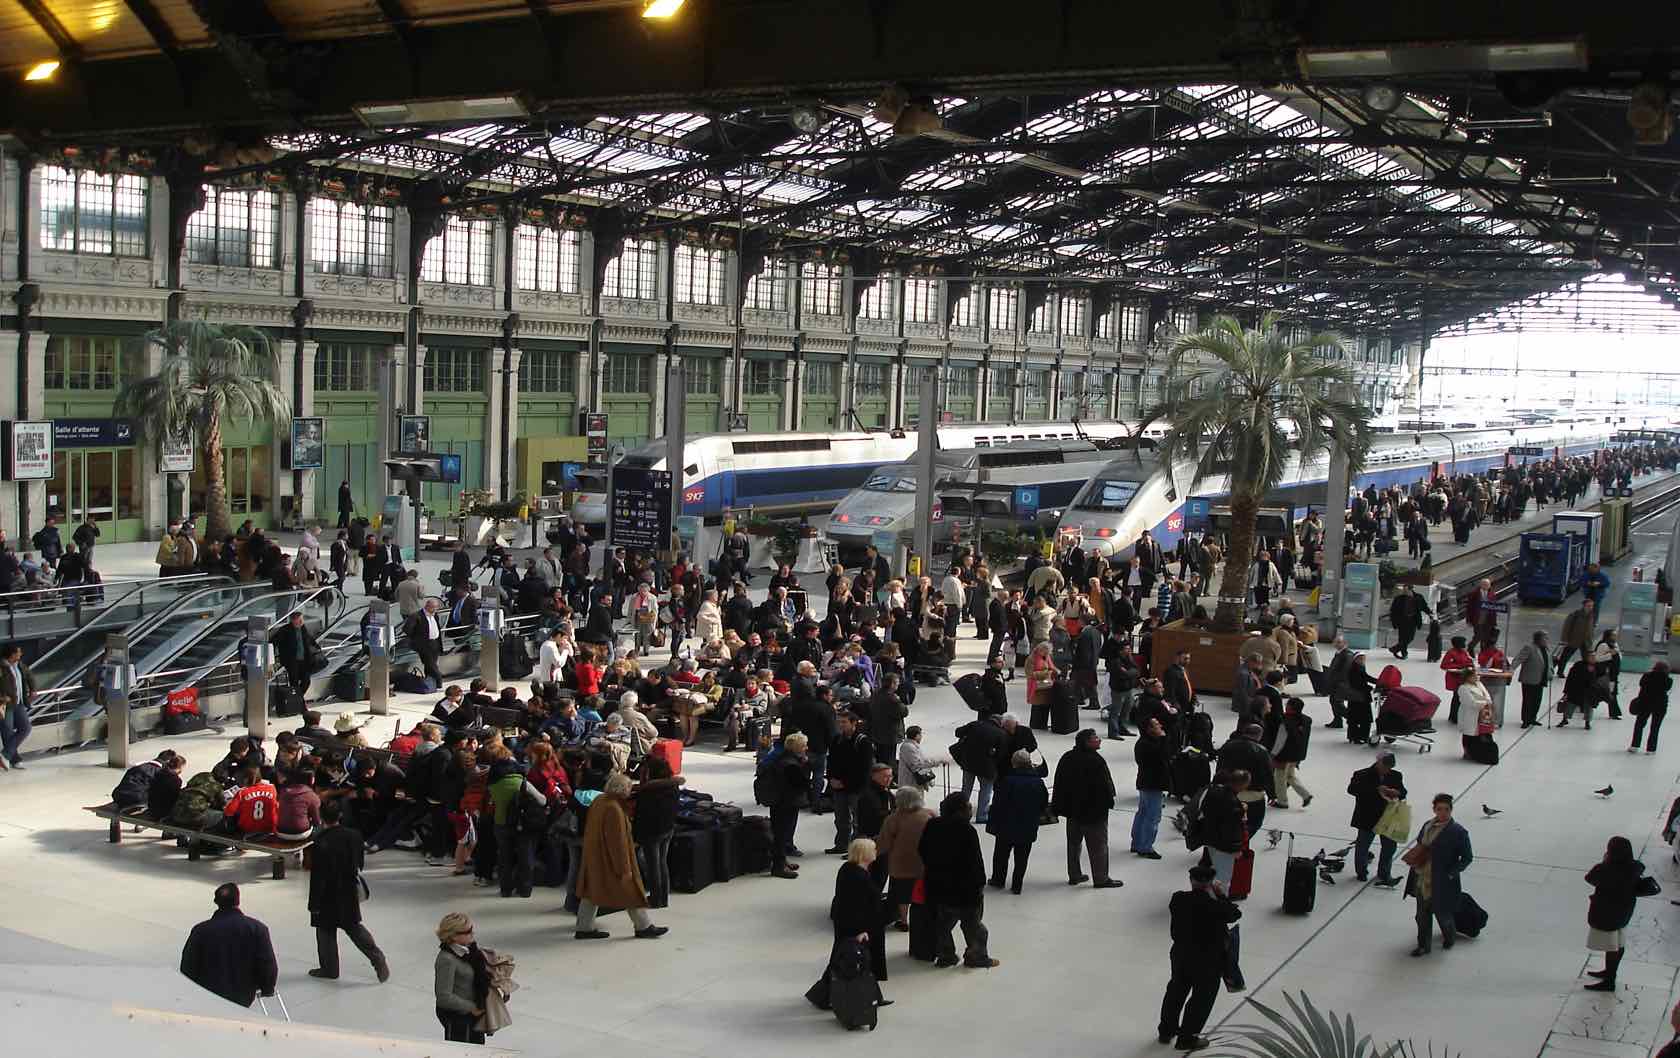 Our Guide to the Grand Train Stations in Paris